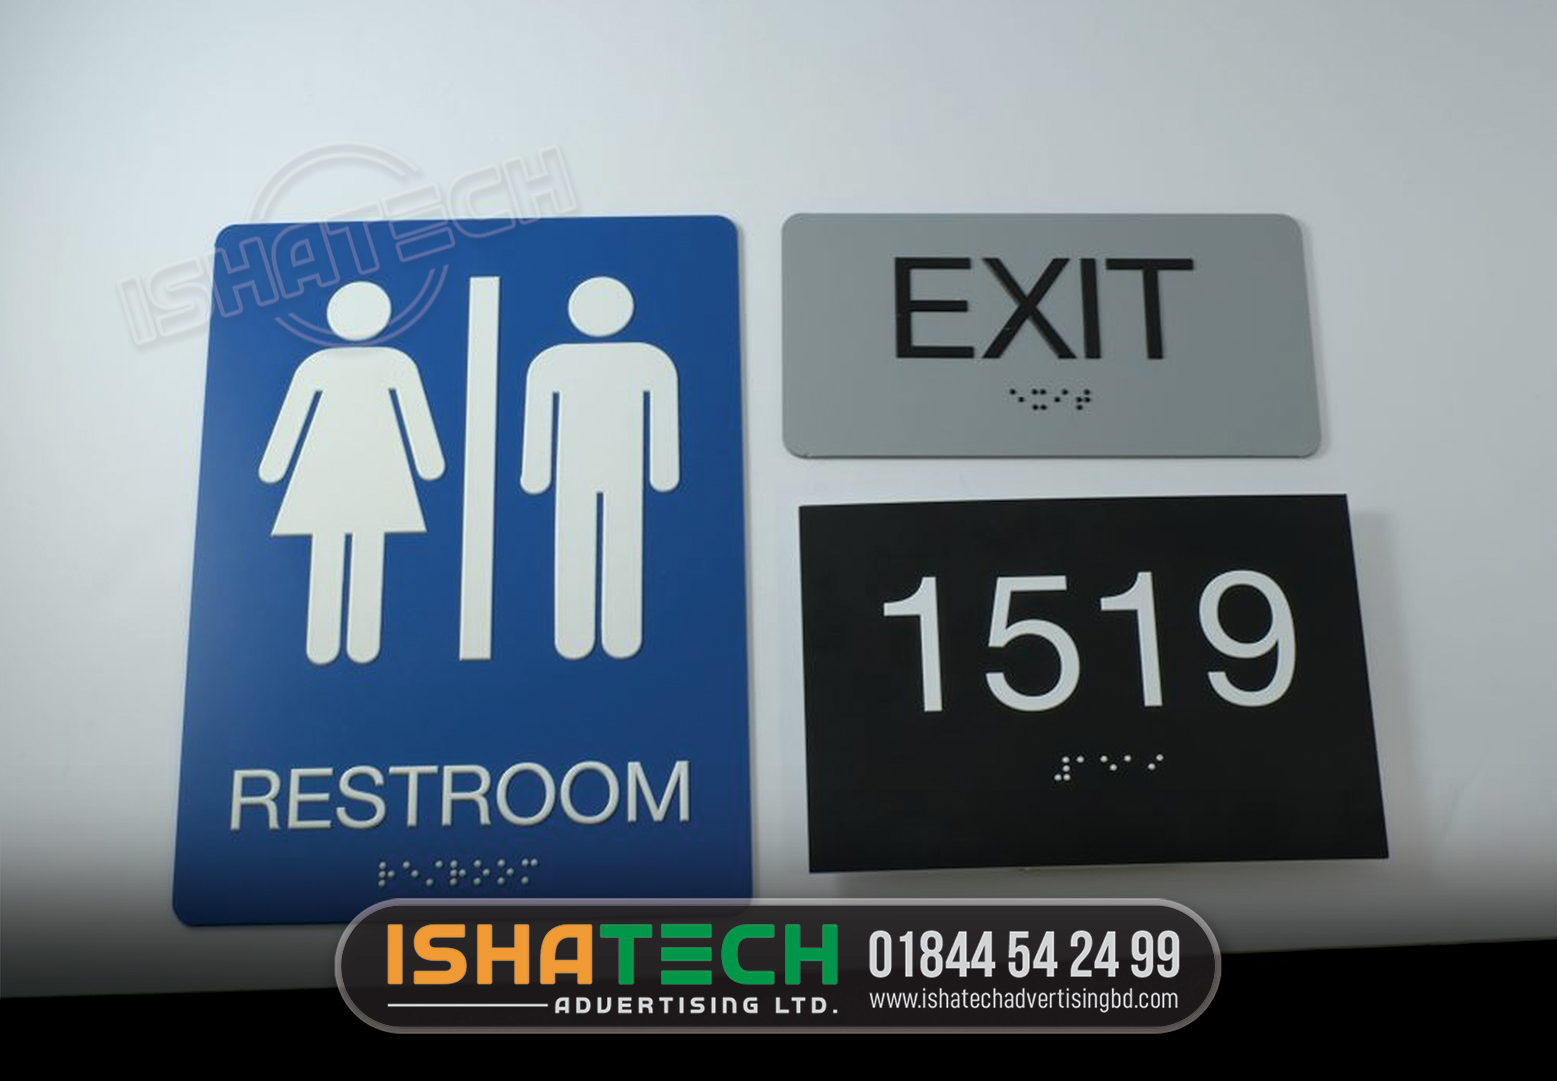 EXIT NAME PLATE, RESTROOM NAME PLATE SIGNS BD